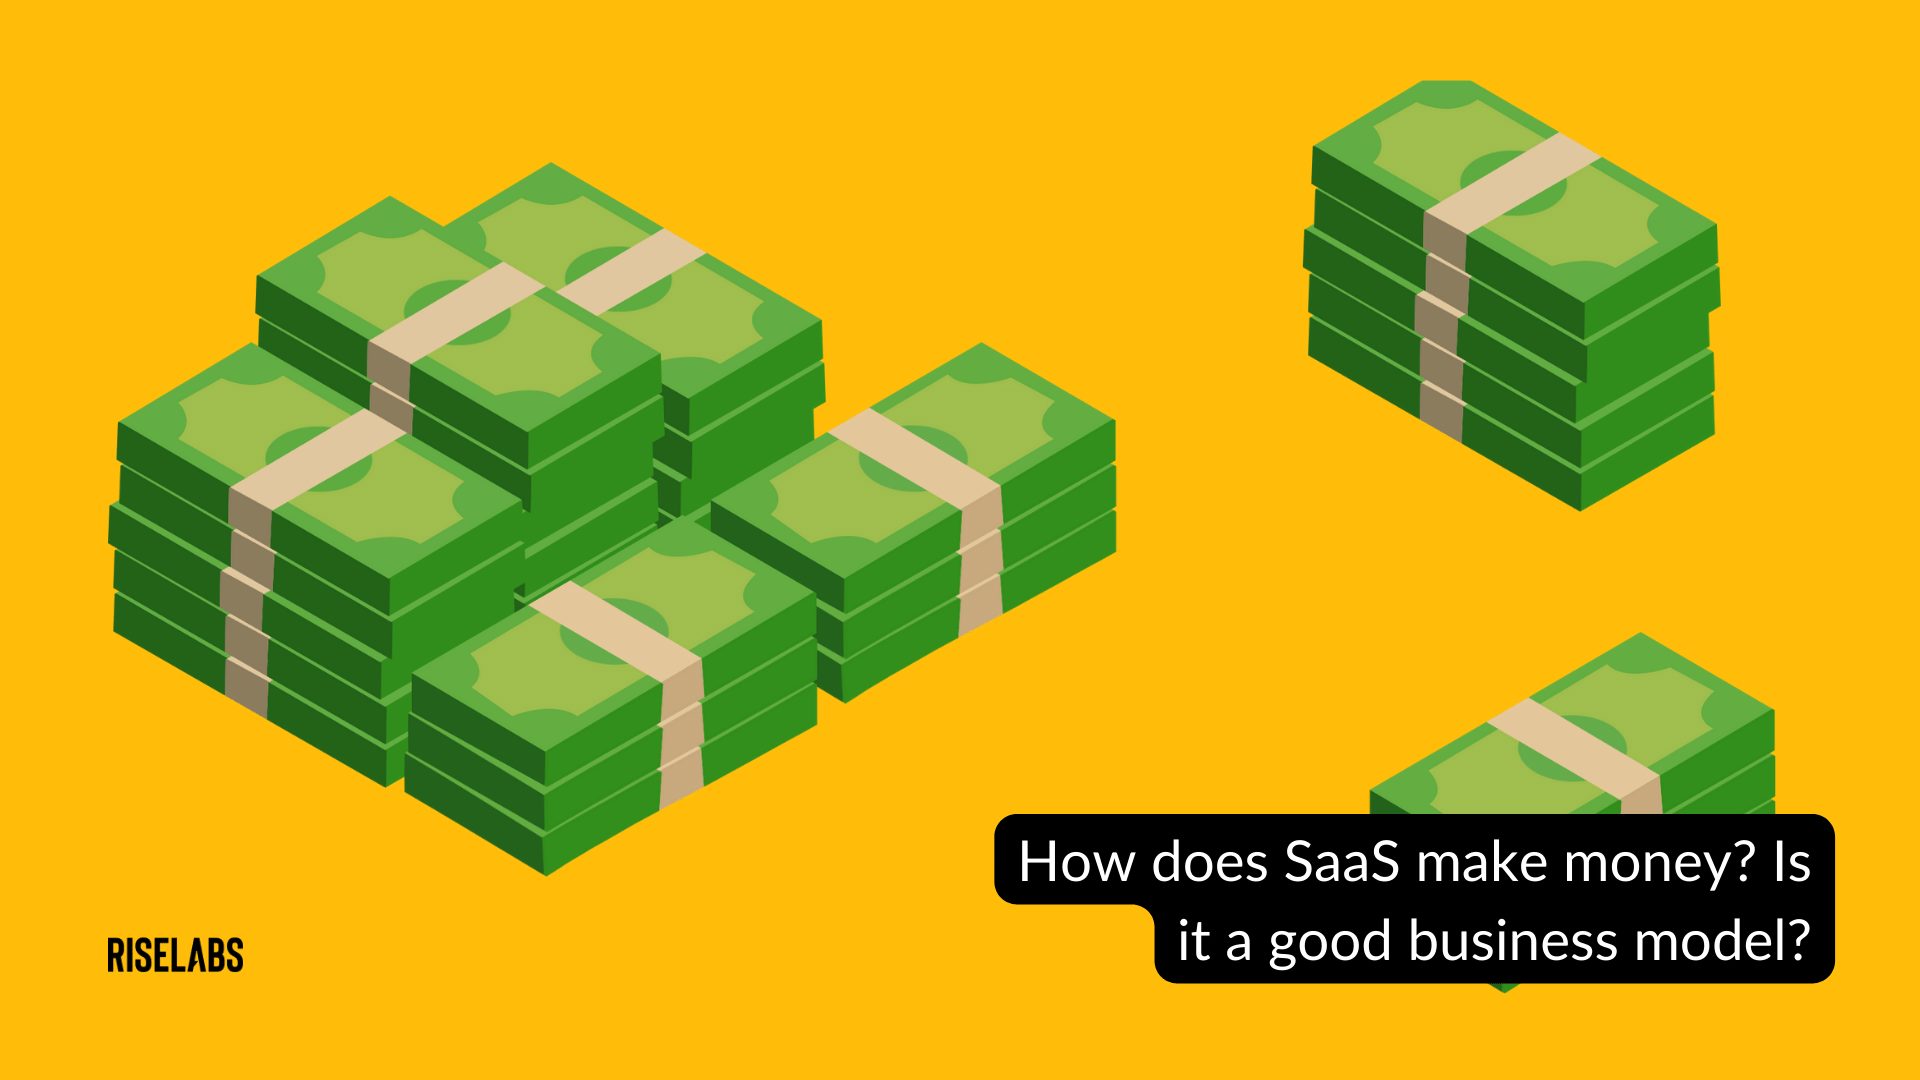 How does SaaS make money? Is it a good business model?